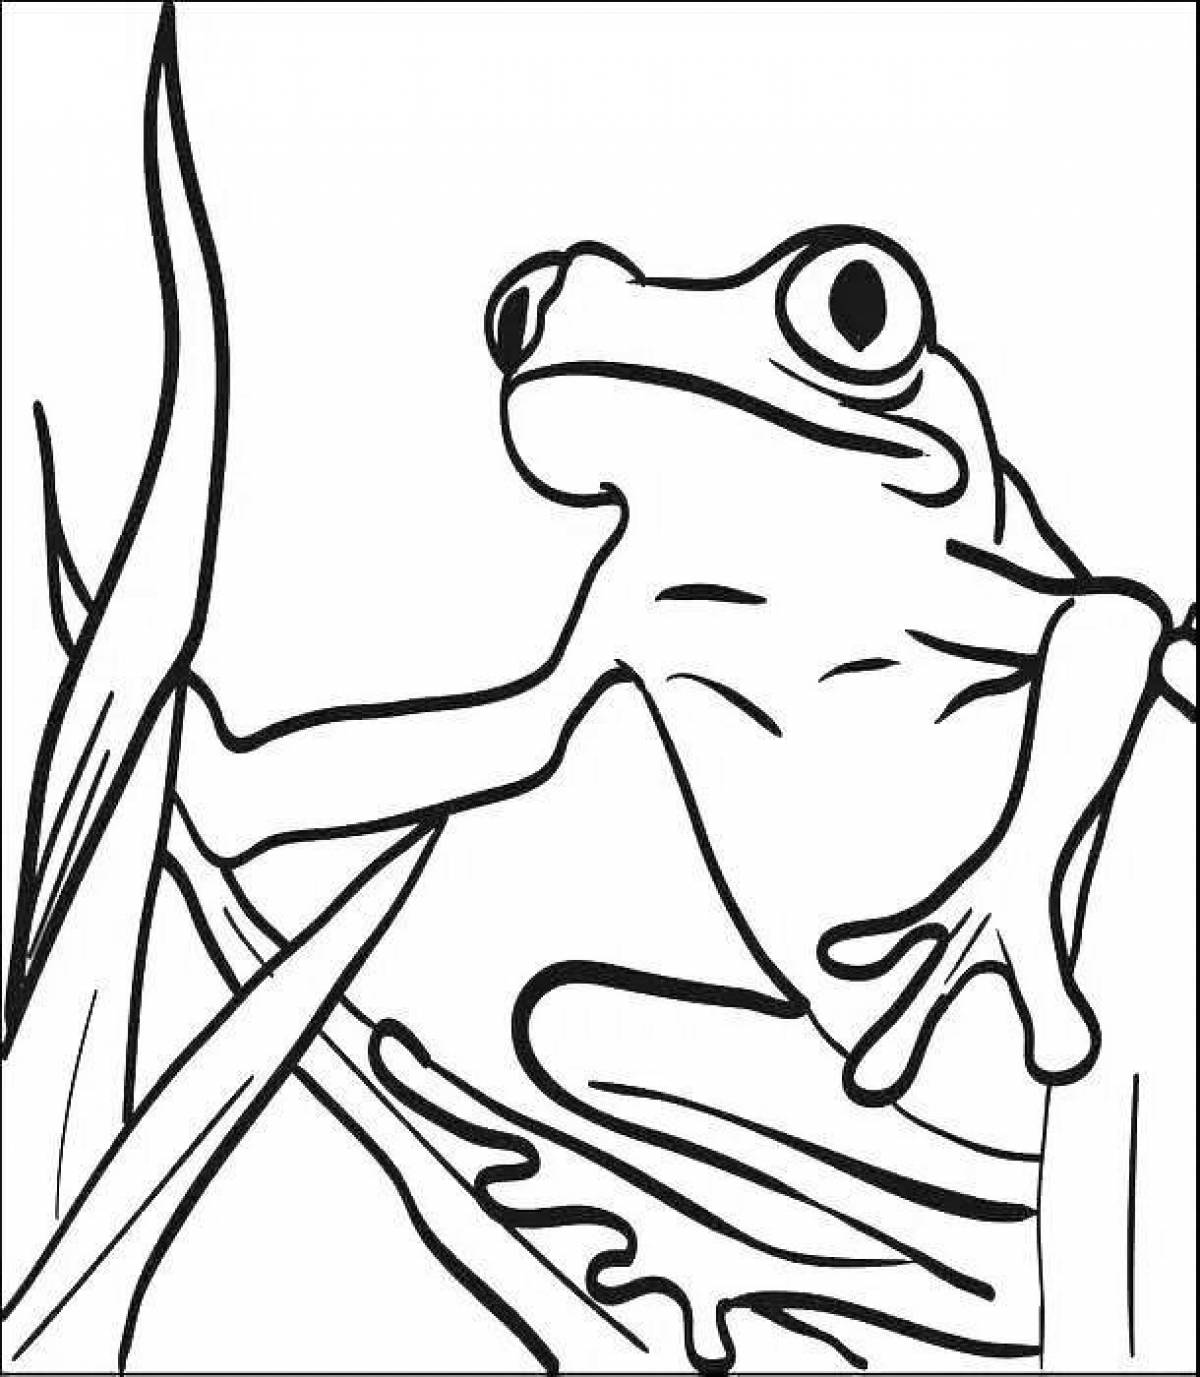 Coloring page aesthetics of a vigorous frog